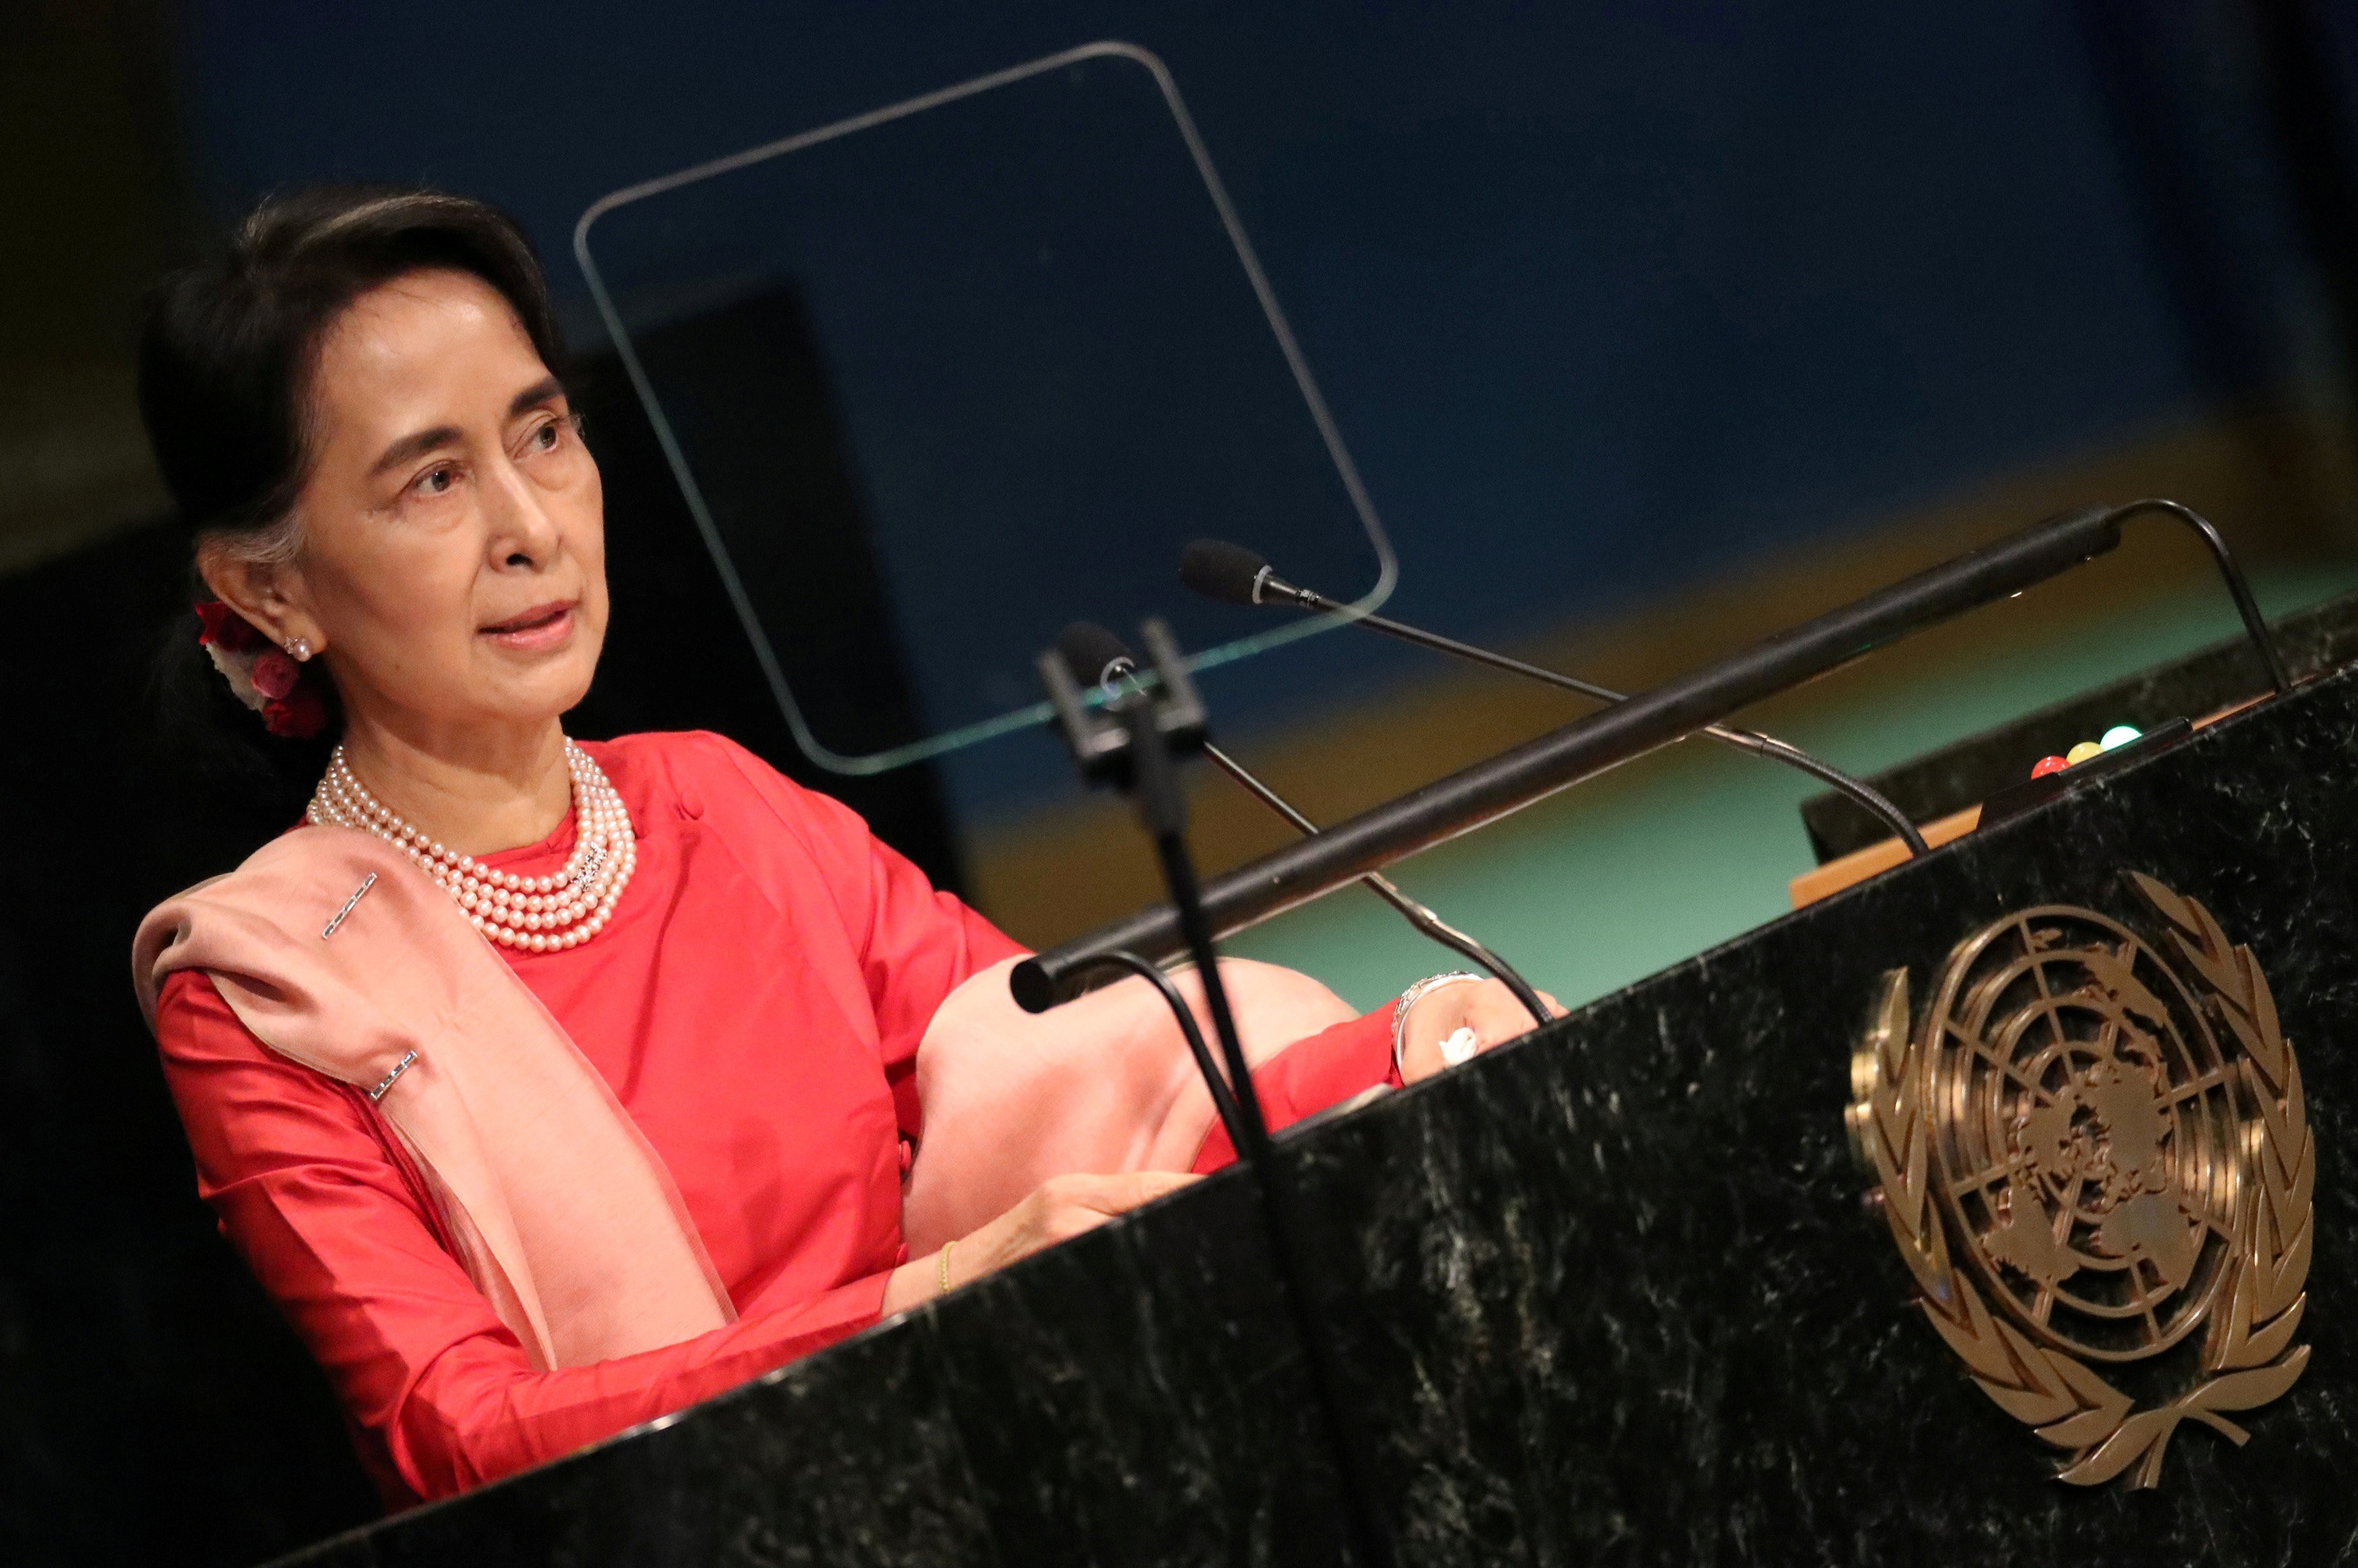 Myanmar's Aung San Suu Kyi addresses the 71st UN General Assembly in New York last September. Once an icon of democracy and human rights, Suu Kyi has come increasingly under fire for her silence as Myanmar’s Rohingya Muslims are persecuted, but her defenders argue that speaking out might prompt another military coup. Photo: Reuters